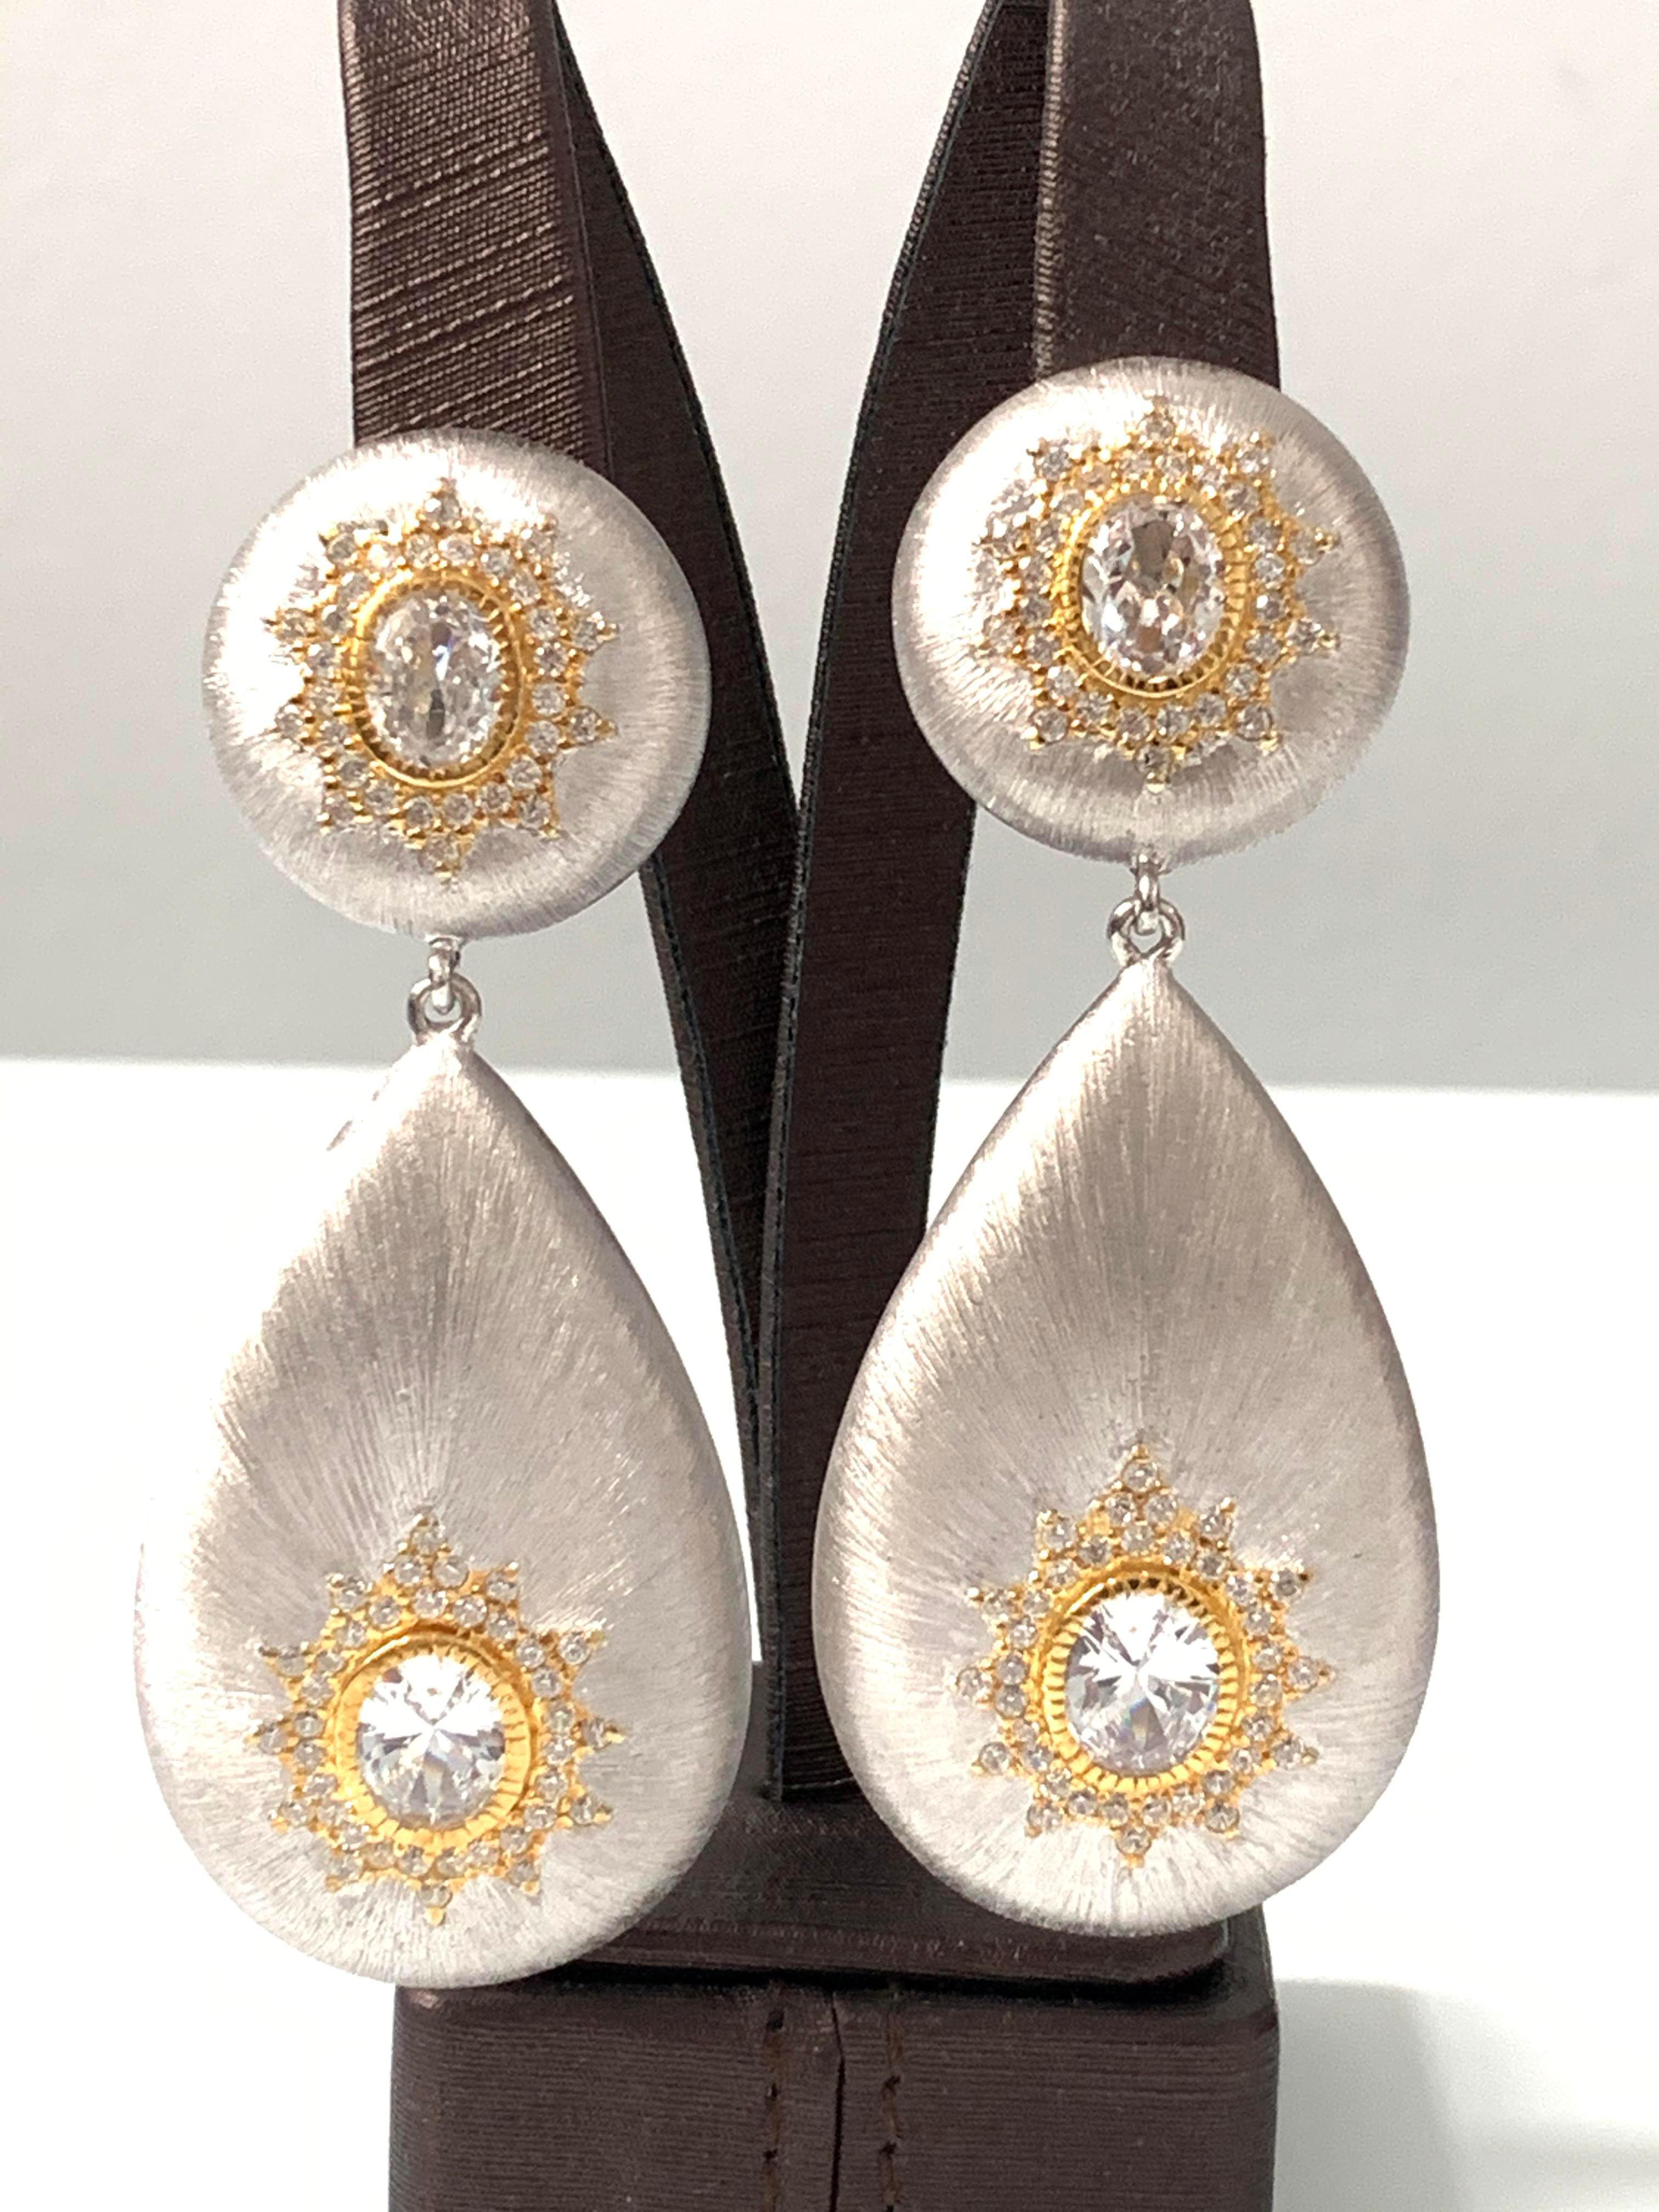 Stunning hand-engraved large teardrop clip-on earrings handset with Cubic Zirconia. The rigato engraving texture are all done by hand creating a beautiful unique look. Top part has diameter of 0.88